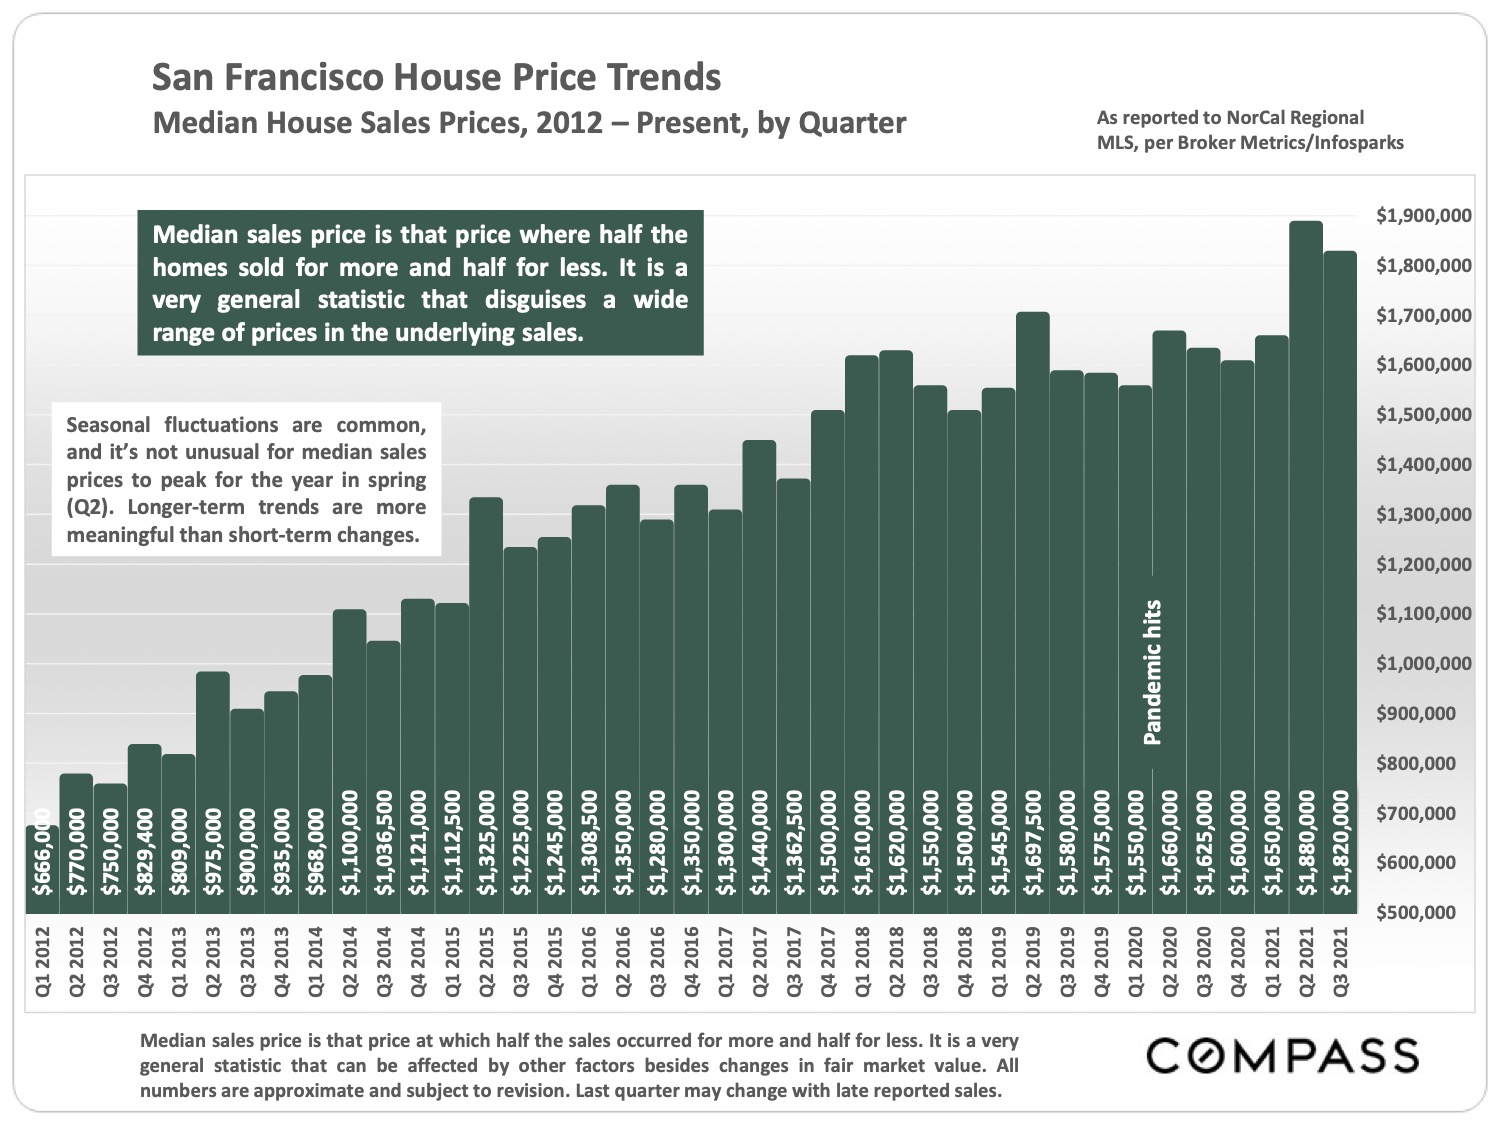 San Francisco House Price Trends - Median House Sales Prices, 2012 - Present by Quarter